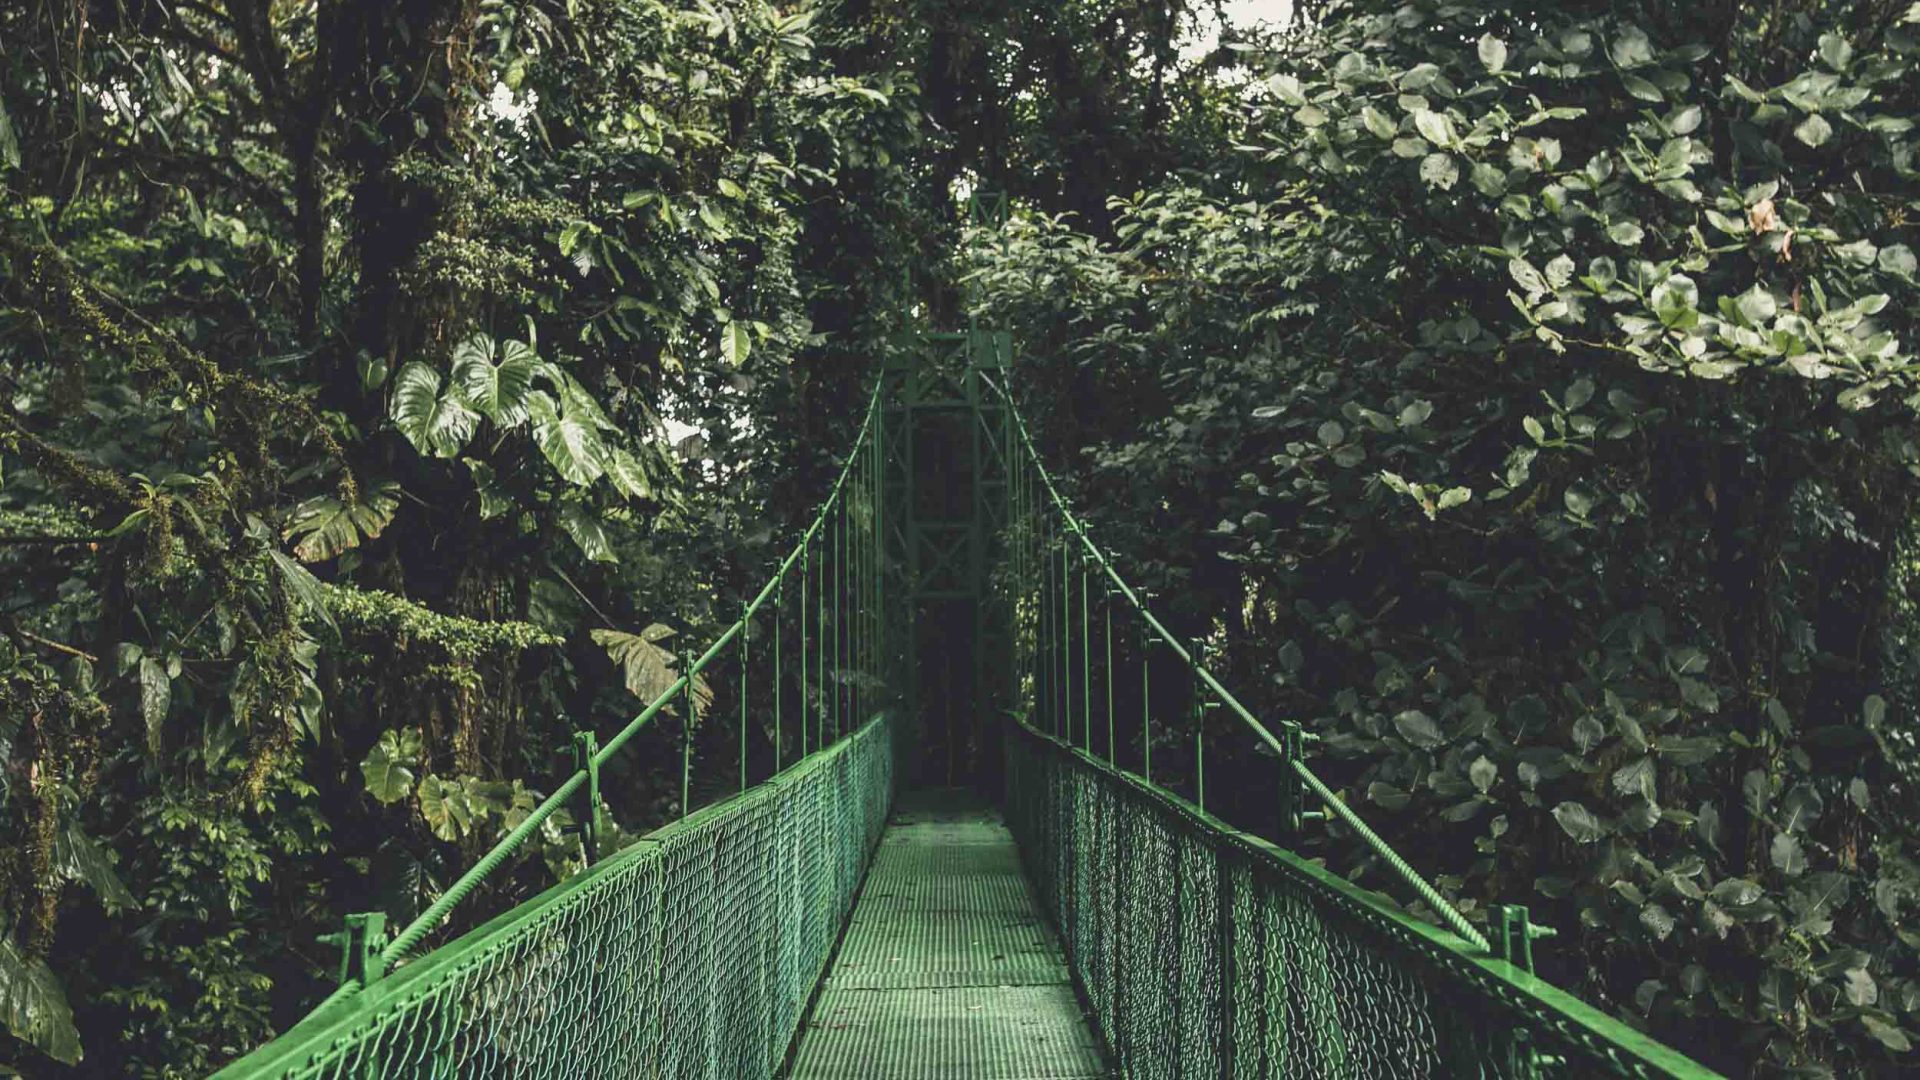 A bridge surrounded by lush green forest in Costa Rica's Monteverde region.